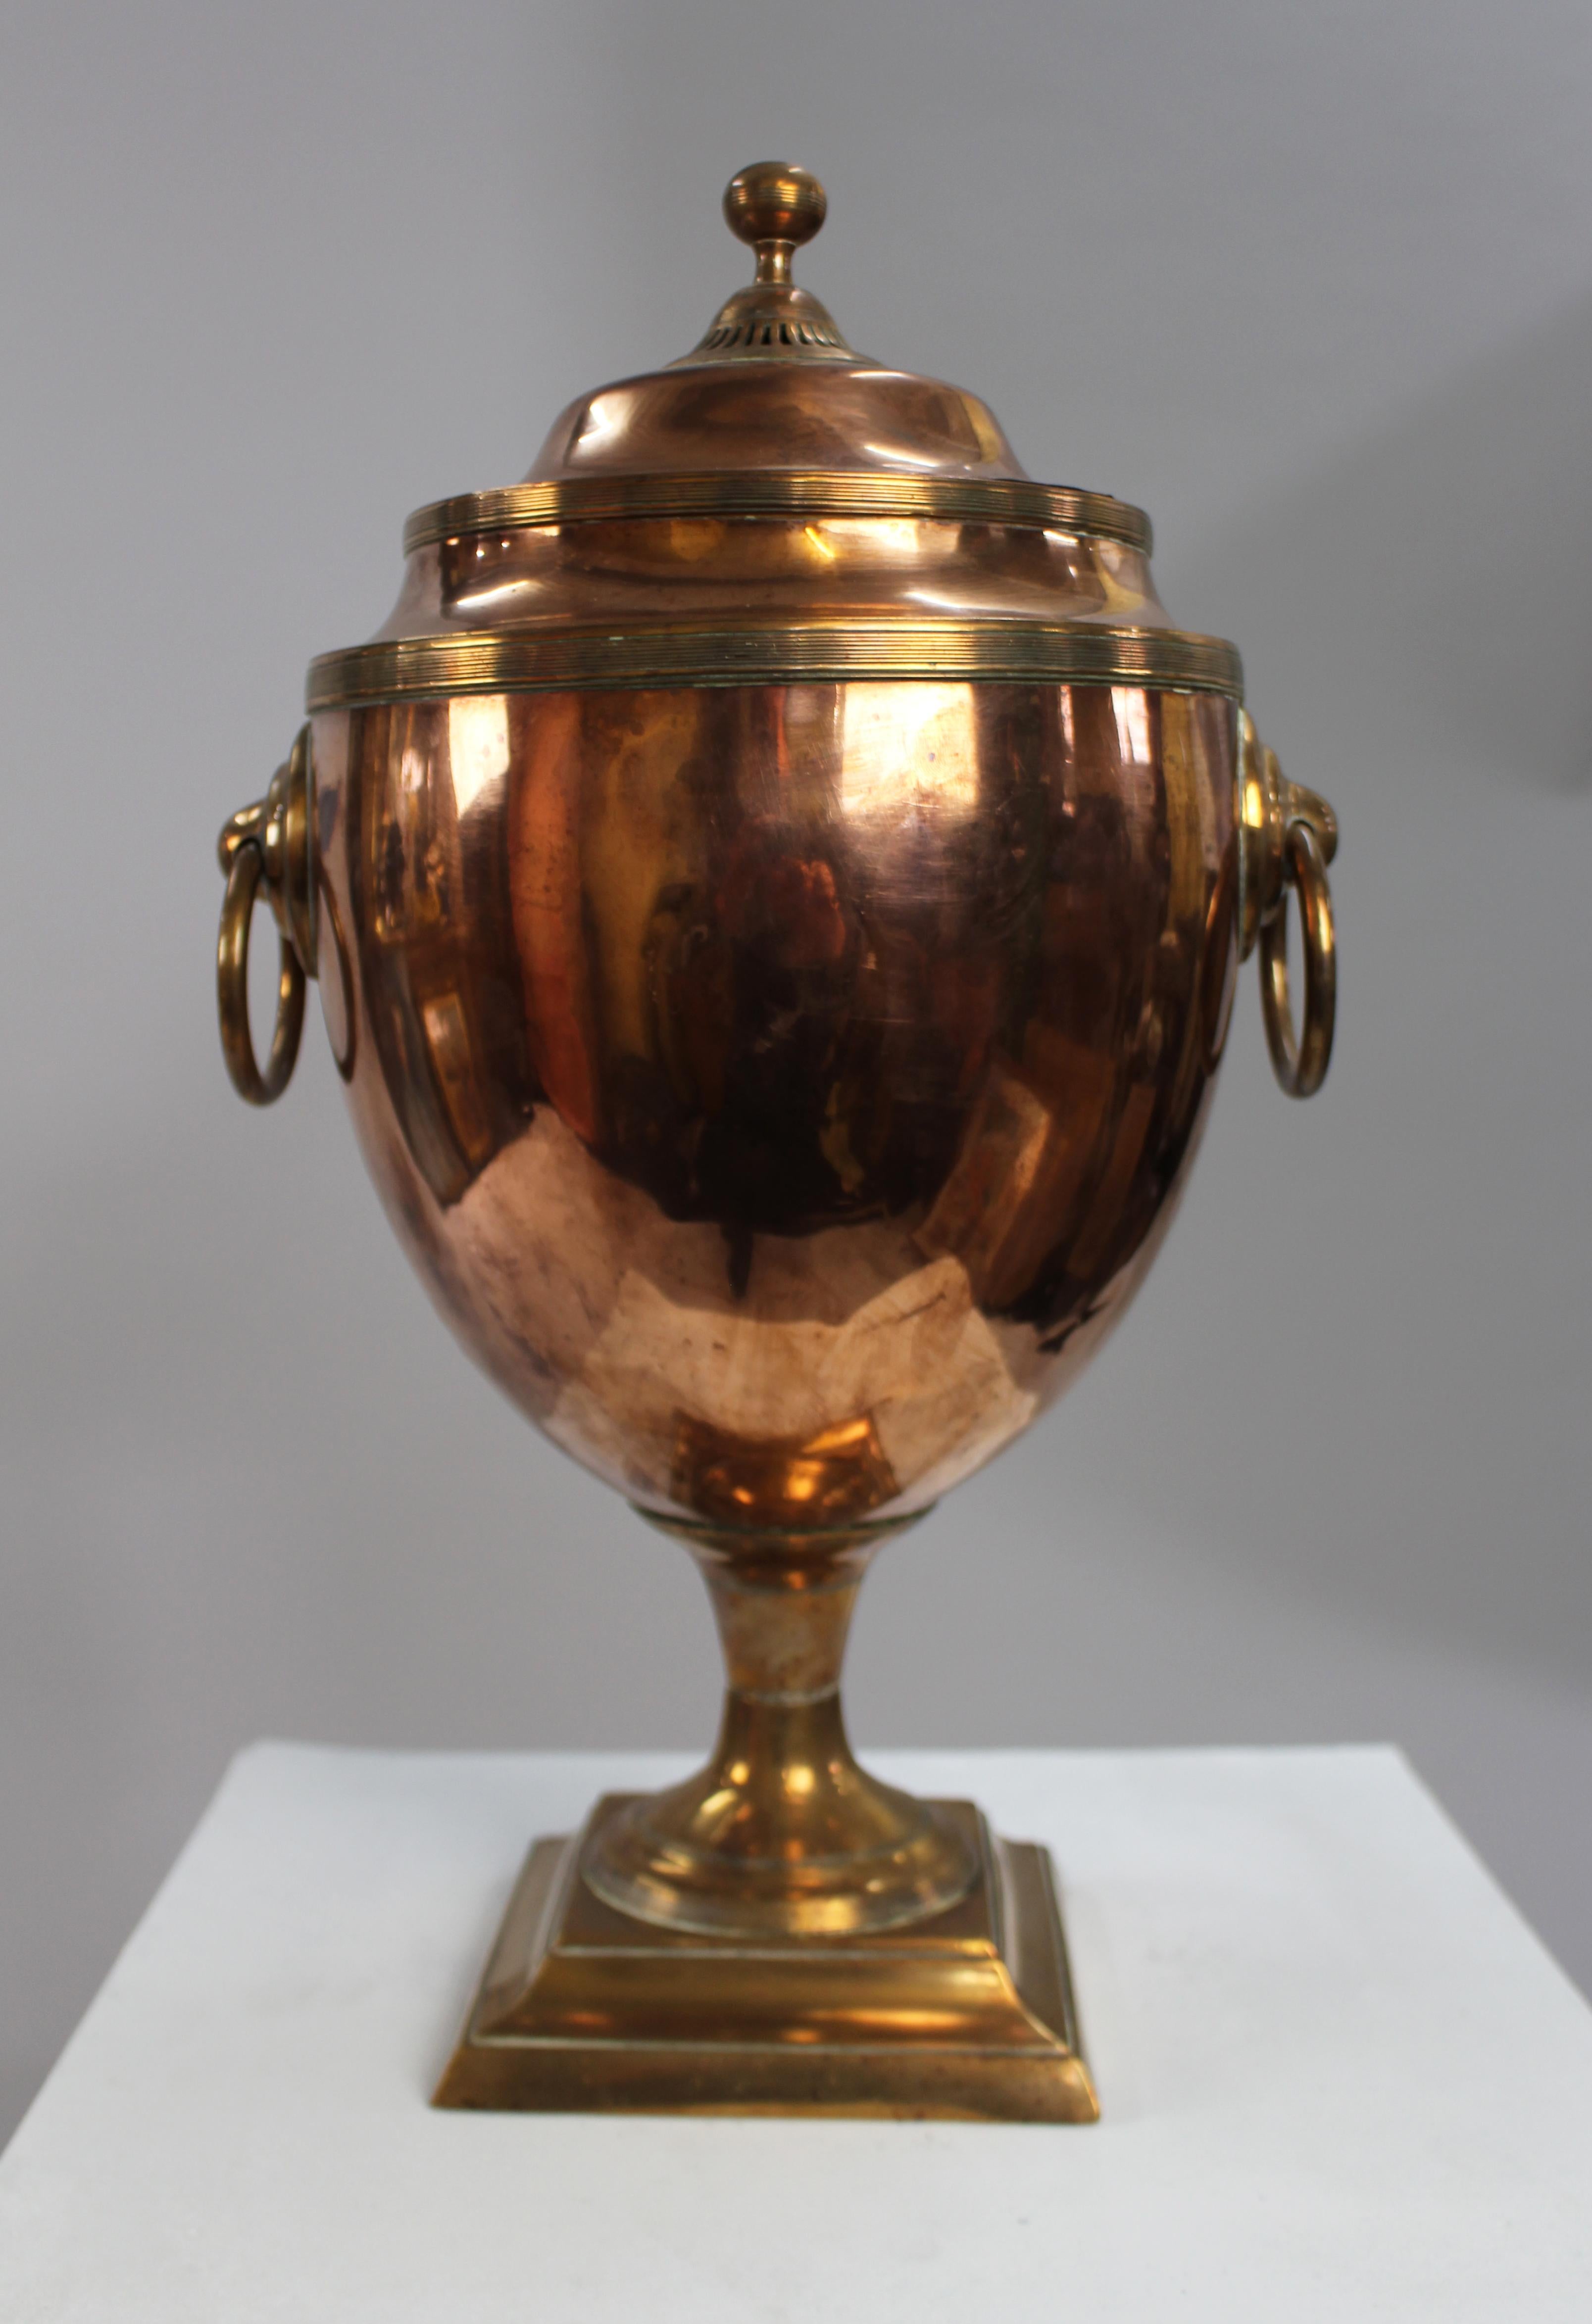 Georgian Adam Style Copper & Brass Samovar


Georgian, c.1790, English

Neoclassical Adam style samovar, late eighteenth century

Copper body and fretwork lid with finial

Brass handles, spout & base

Measures 26 x 27 x 45 (height) cm

Offered in